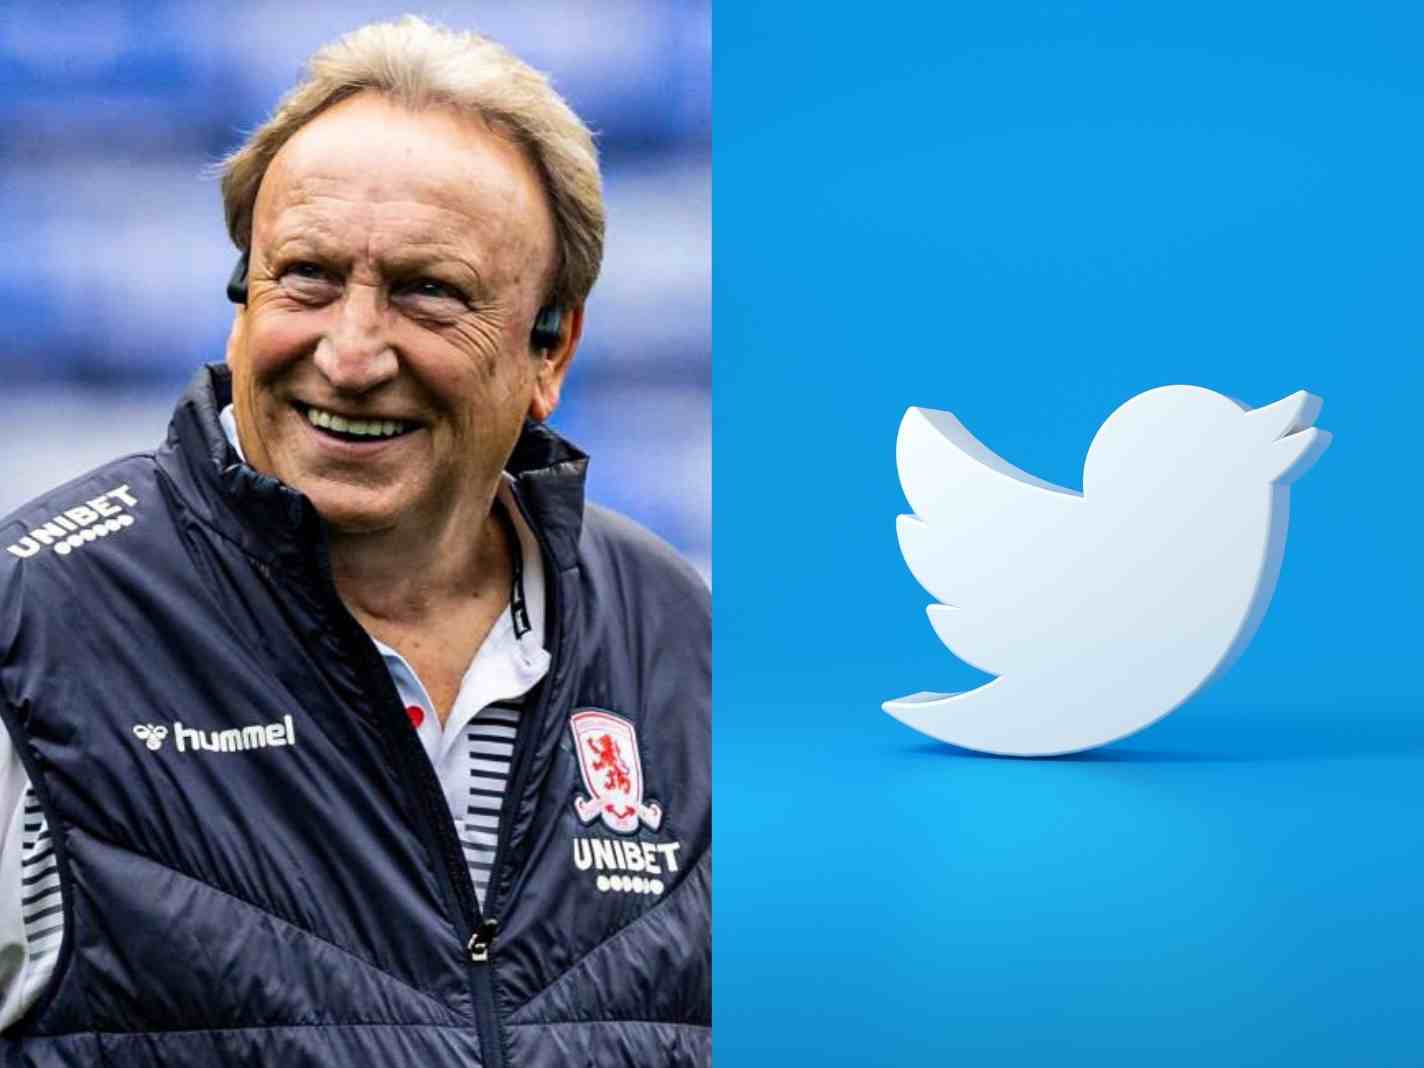 Neil Warnock has Twitter? Old school  manager joins social media in unexpected move